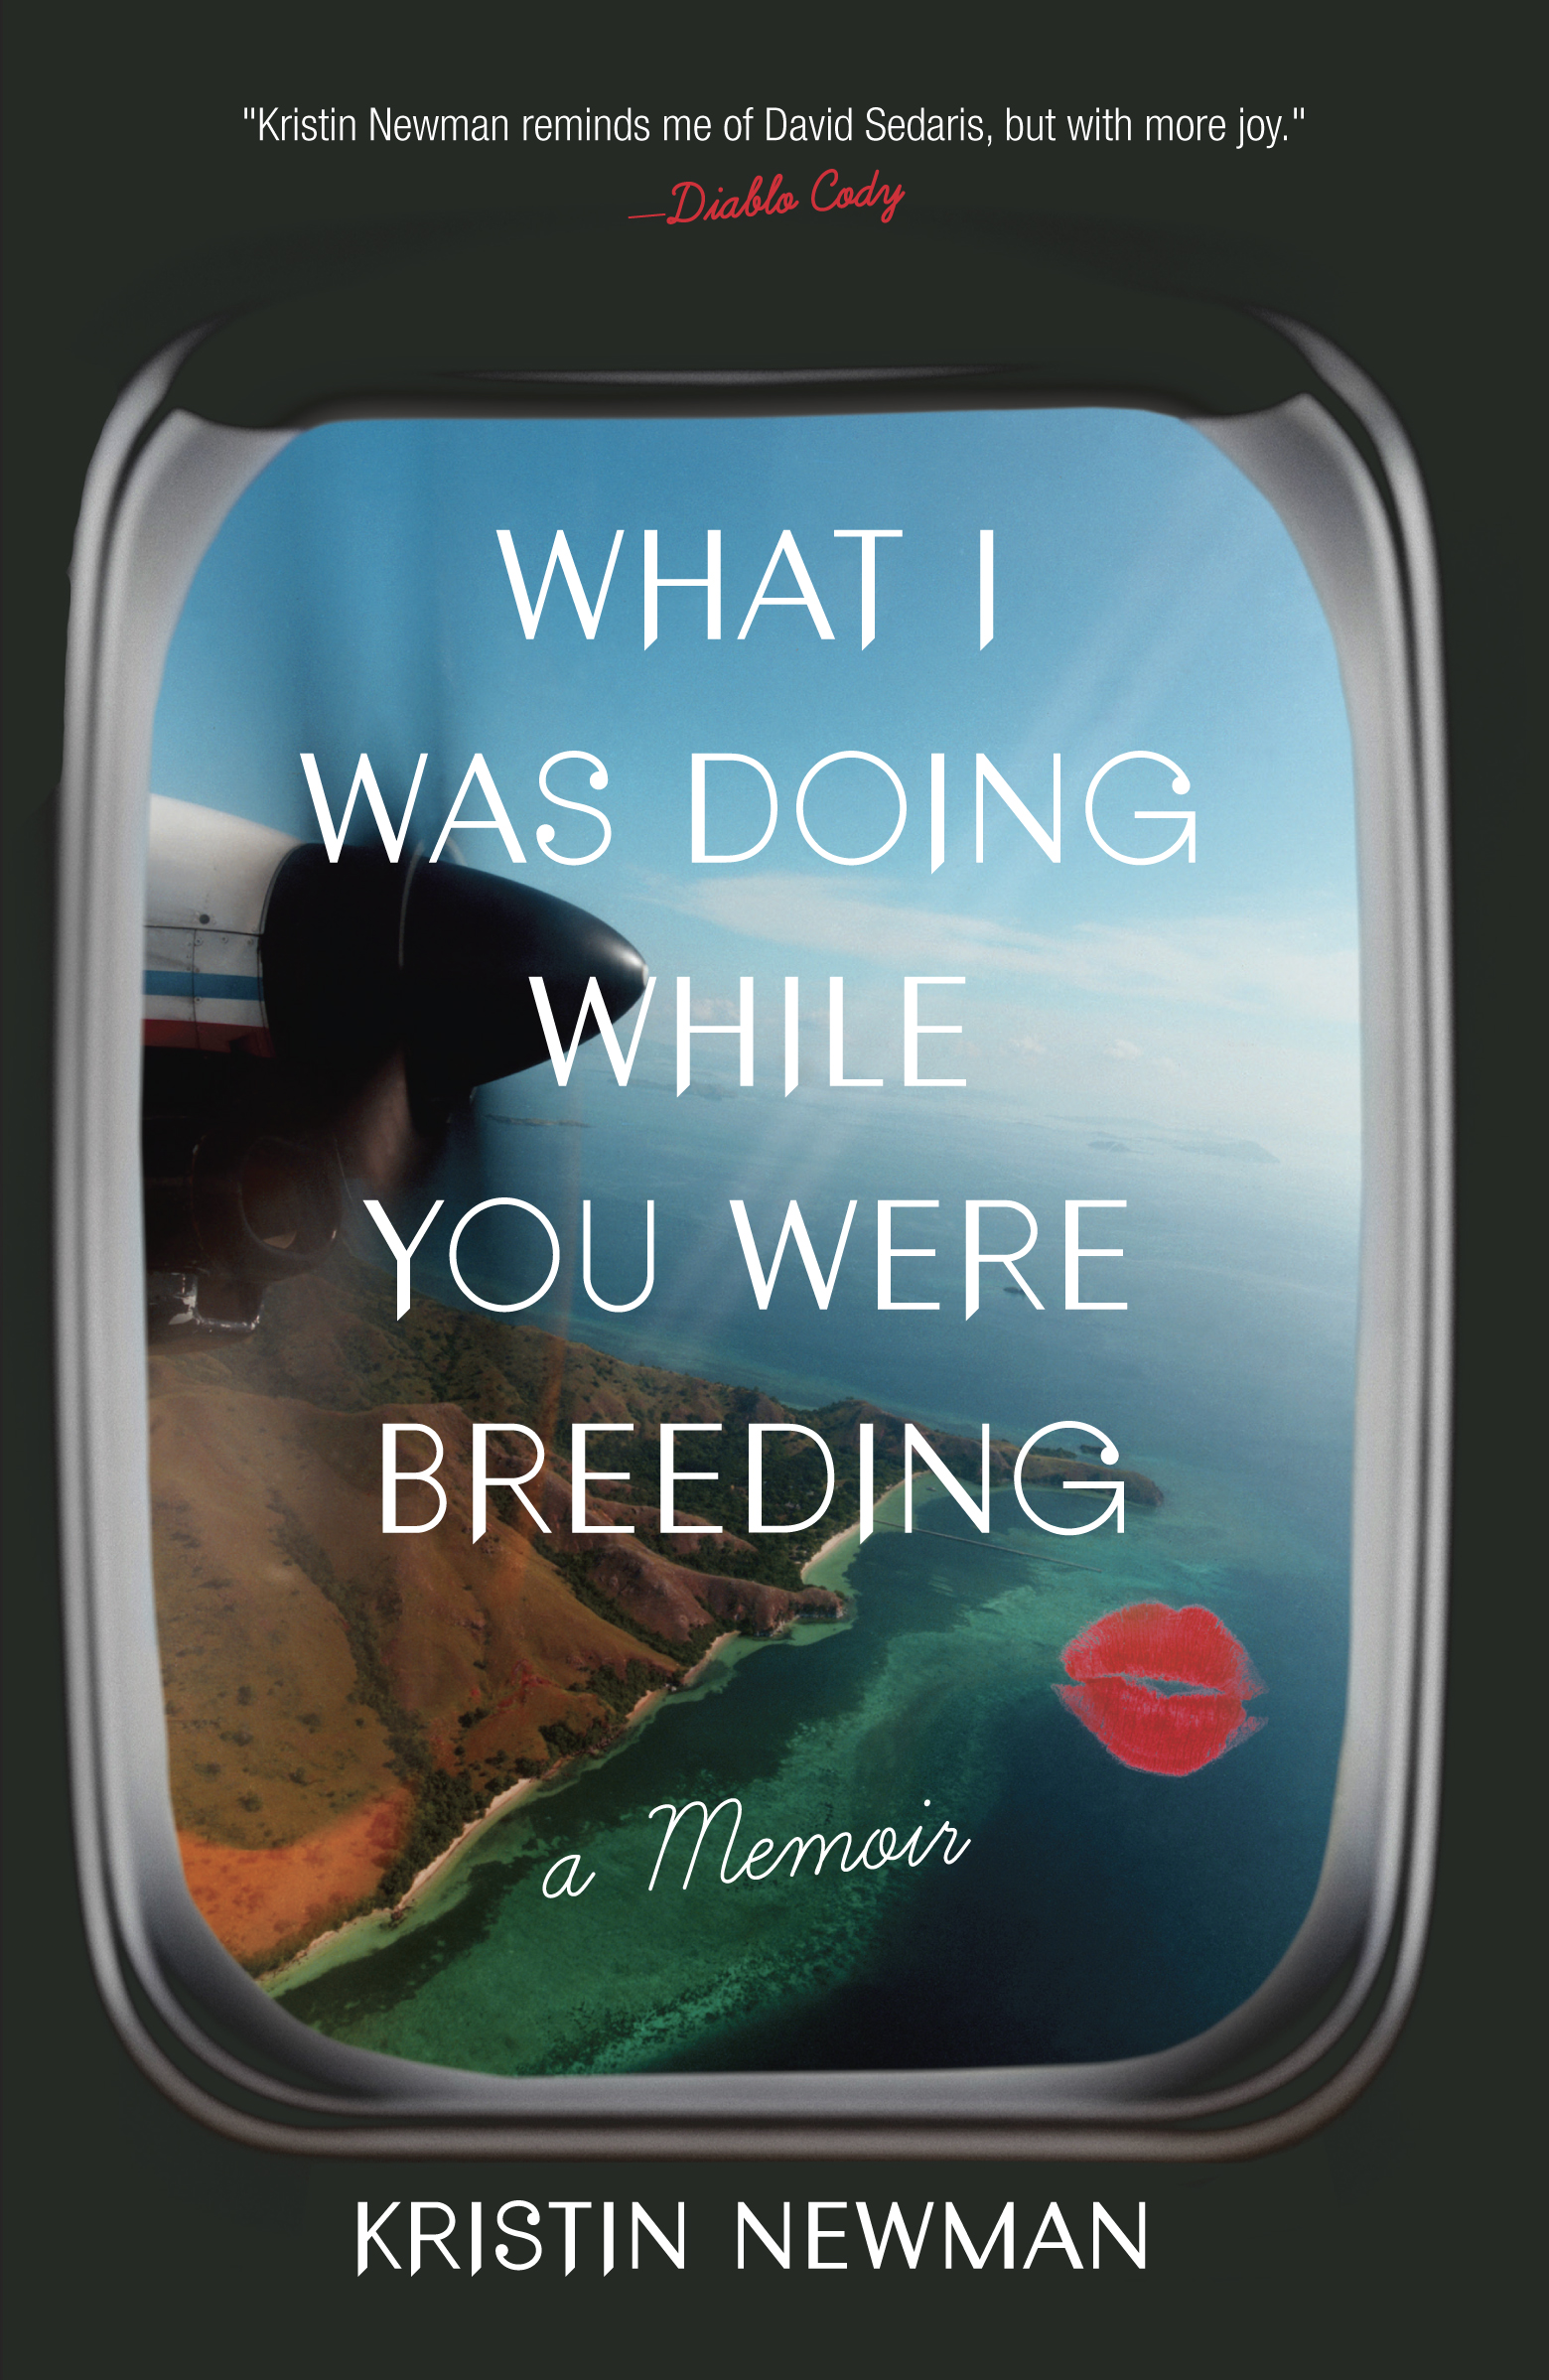 What I Was Doing While You Were Breeding, by Kristin Newman